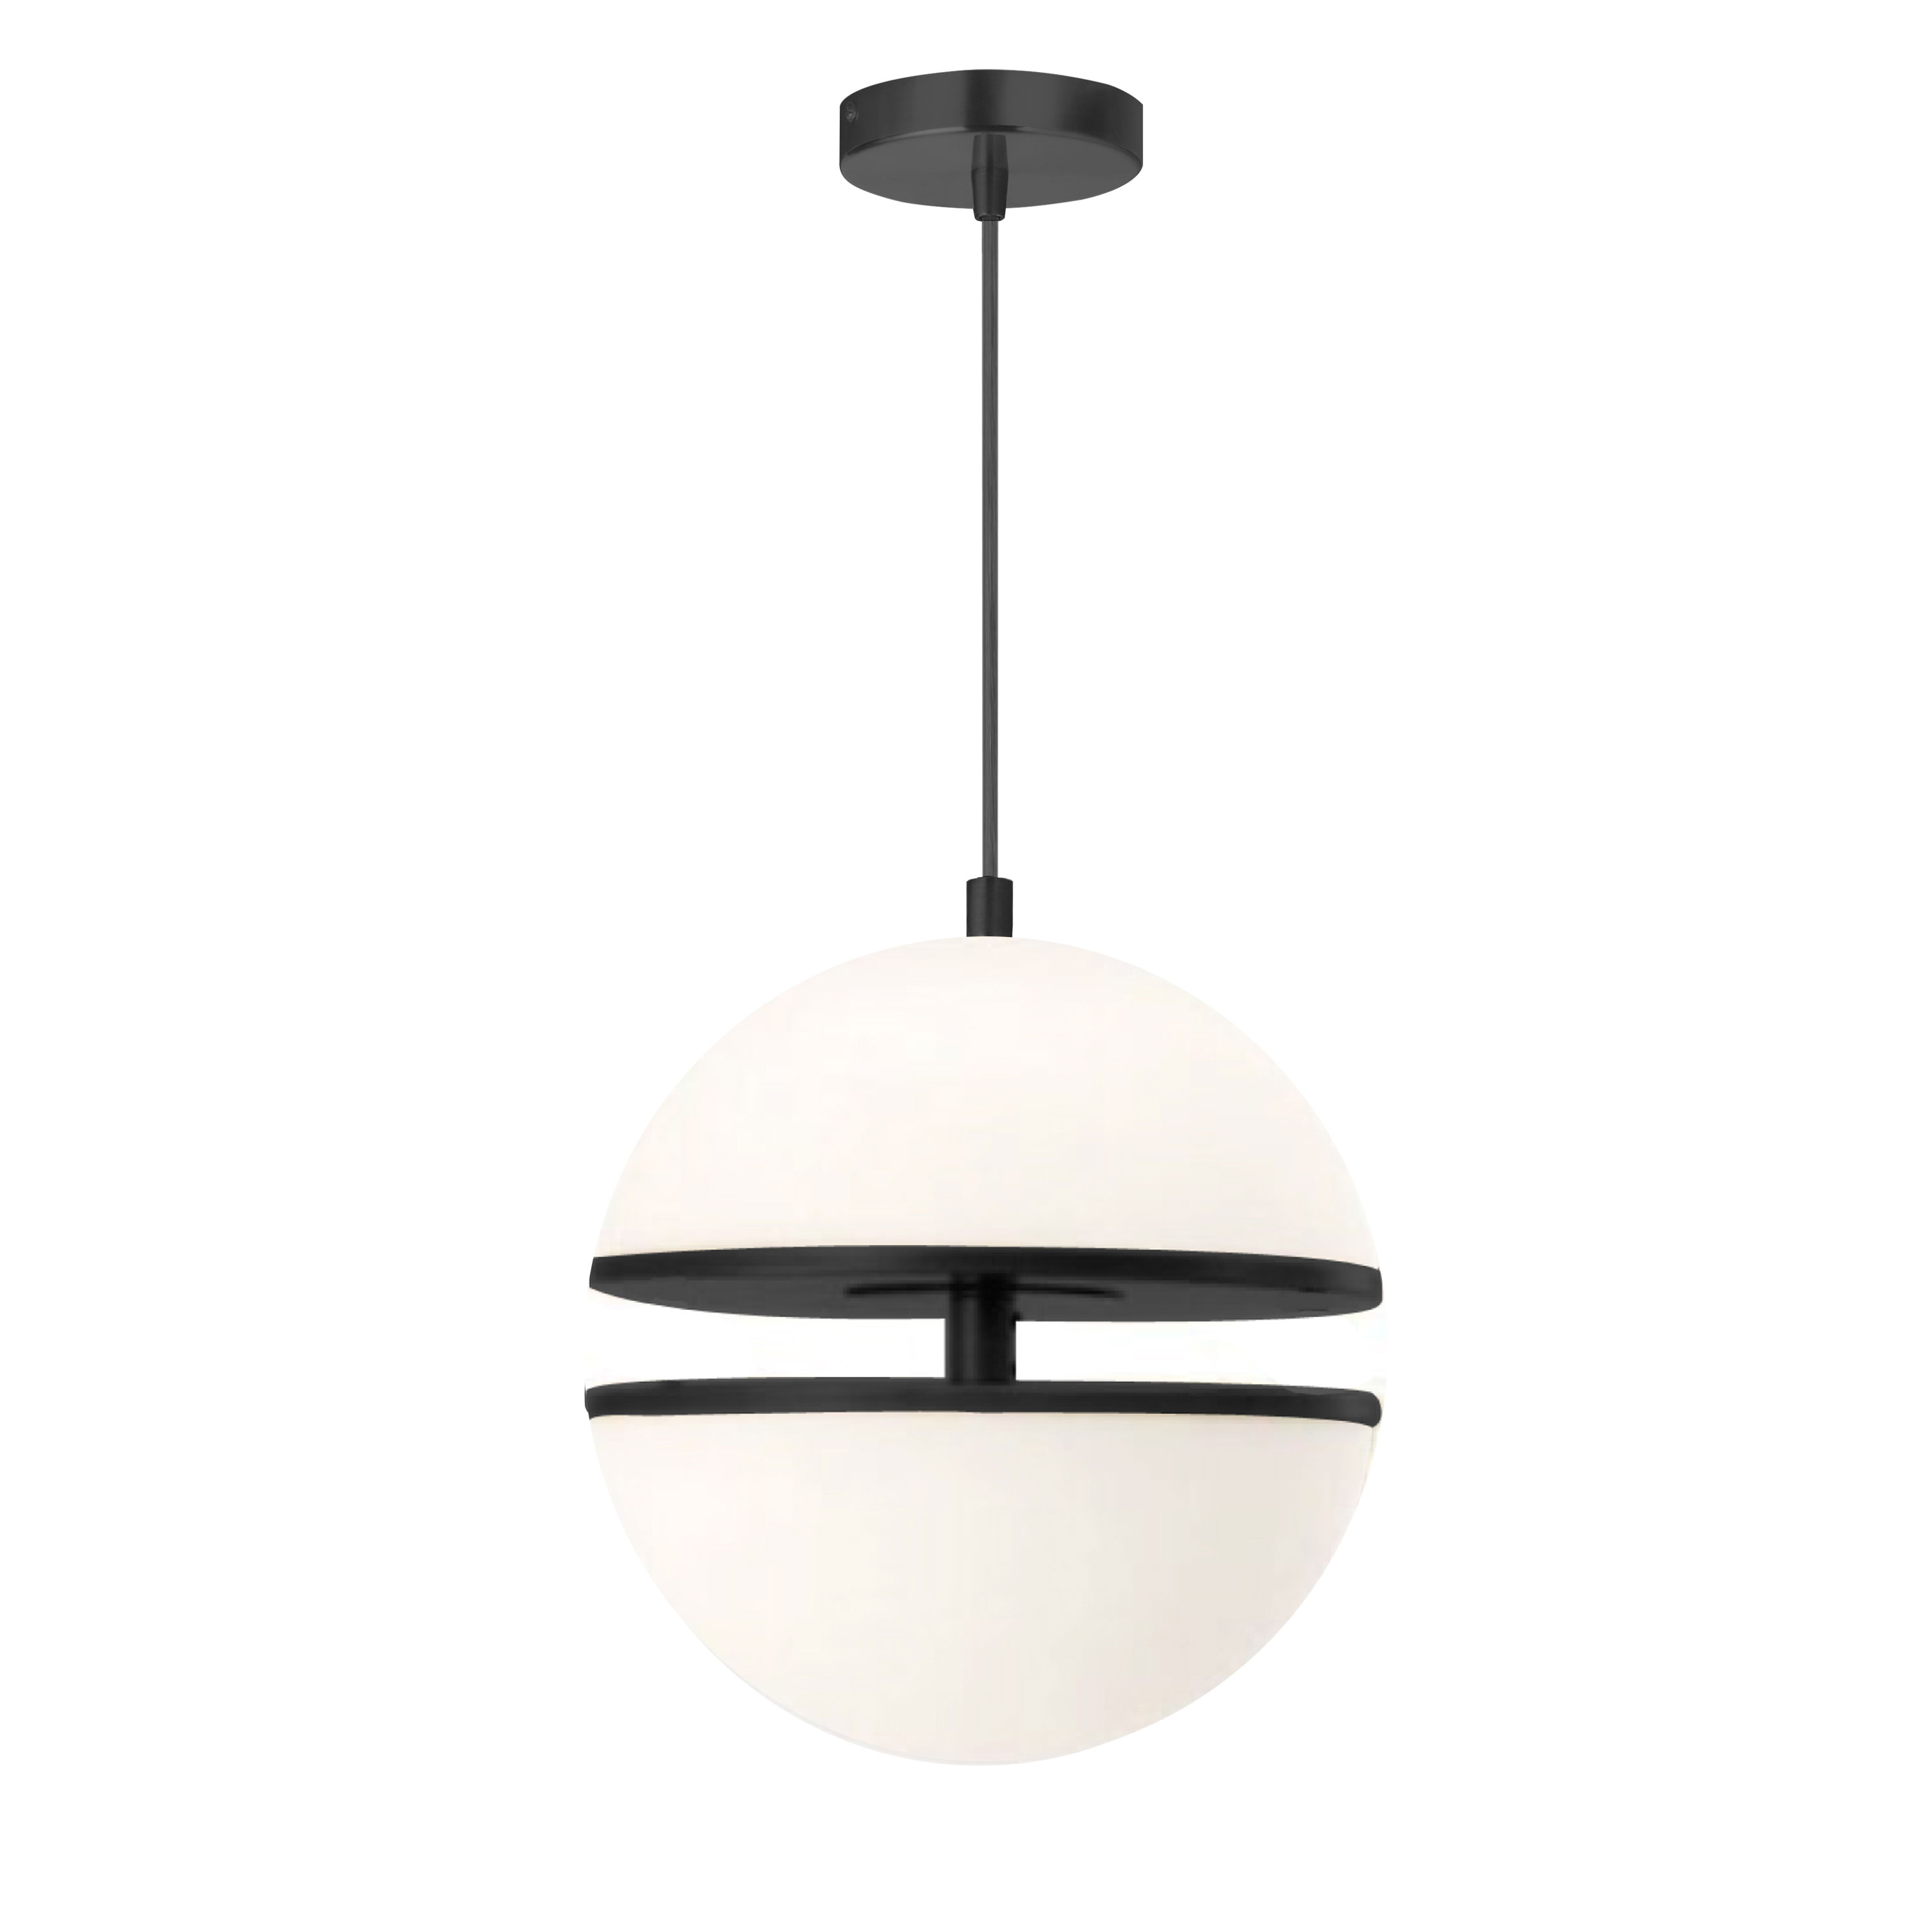 Inspired by the shapes of the cosmos, the Atomic family of lighting builds on the basic appeal of the sphere. An intriguing element of construction adds a focal point at the center of the design. A simple drop leads to a metal frame and a white glass globe with a separated upper and lower half. Lights shine from both halves. In one option, the frame in a contrasting color is visible at the mid-gap. In another option, a fabric shade in complementary or contrasting color rings the middle for a subtler glow of lighting. The stylish modern Atomic family of lighting will blend into your fashionable living or dining room, or main hallway.